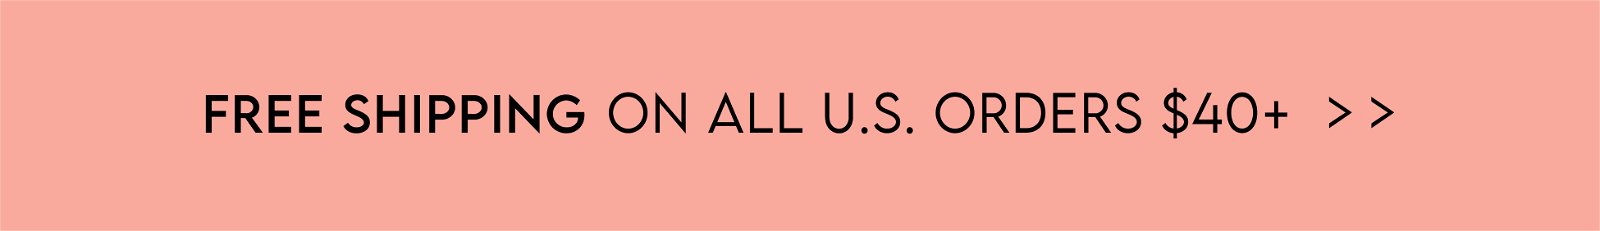 free shipping on all U.S. orders $40+